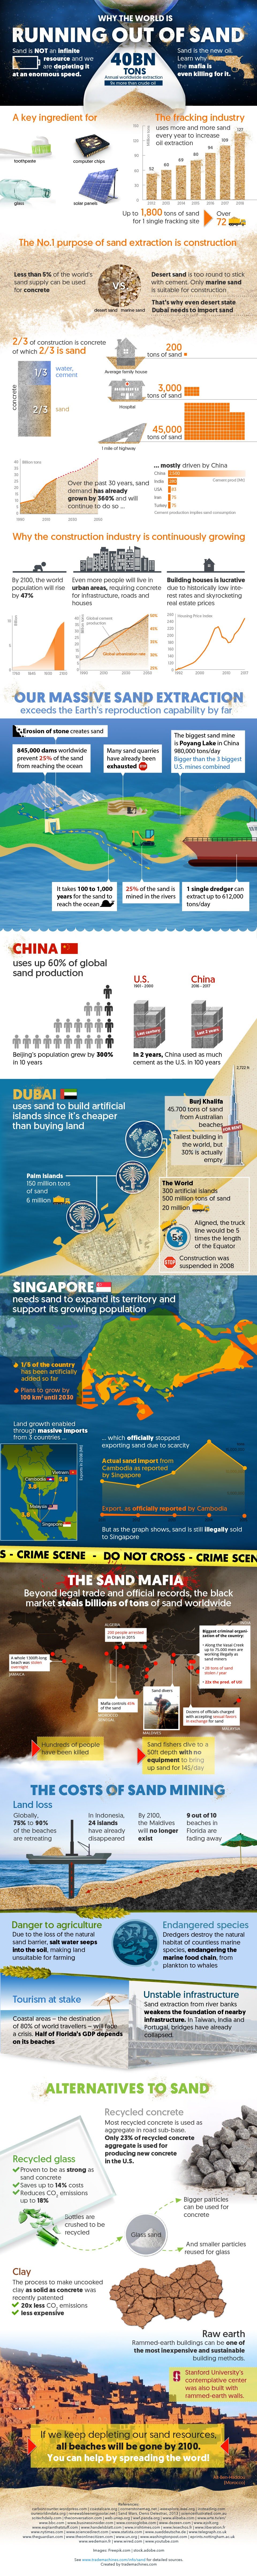 Why The World Is Running Out Of Sand #Infographic